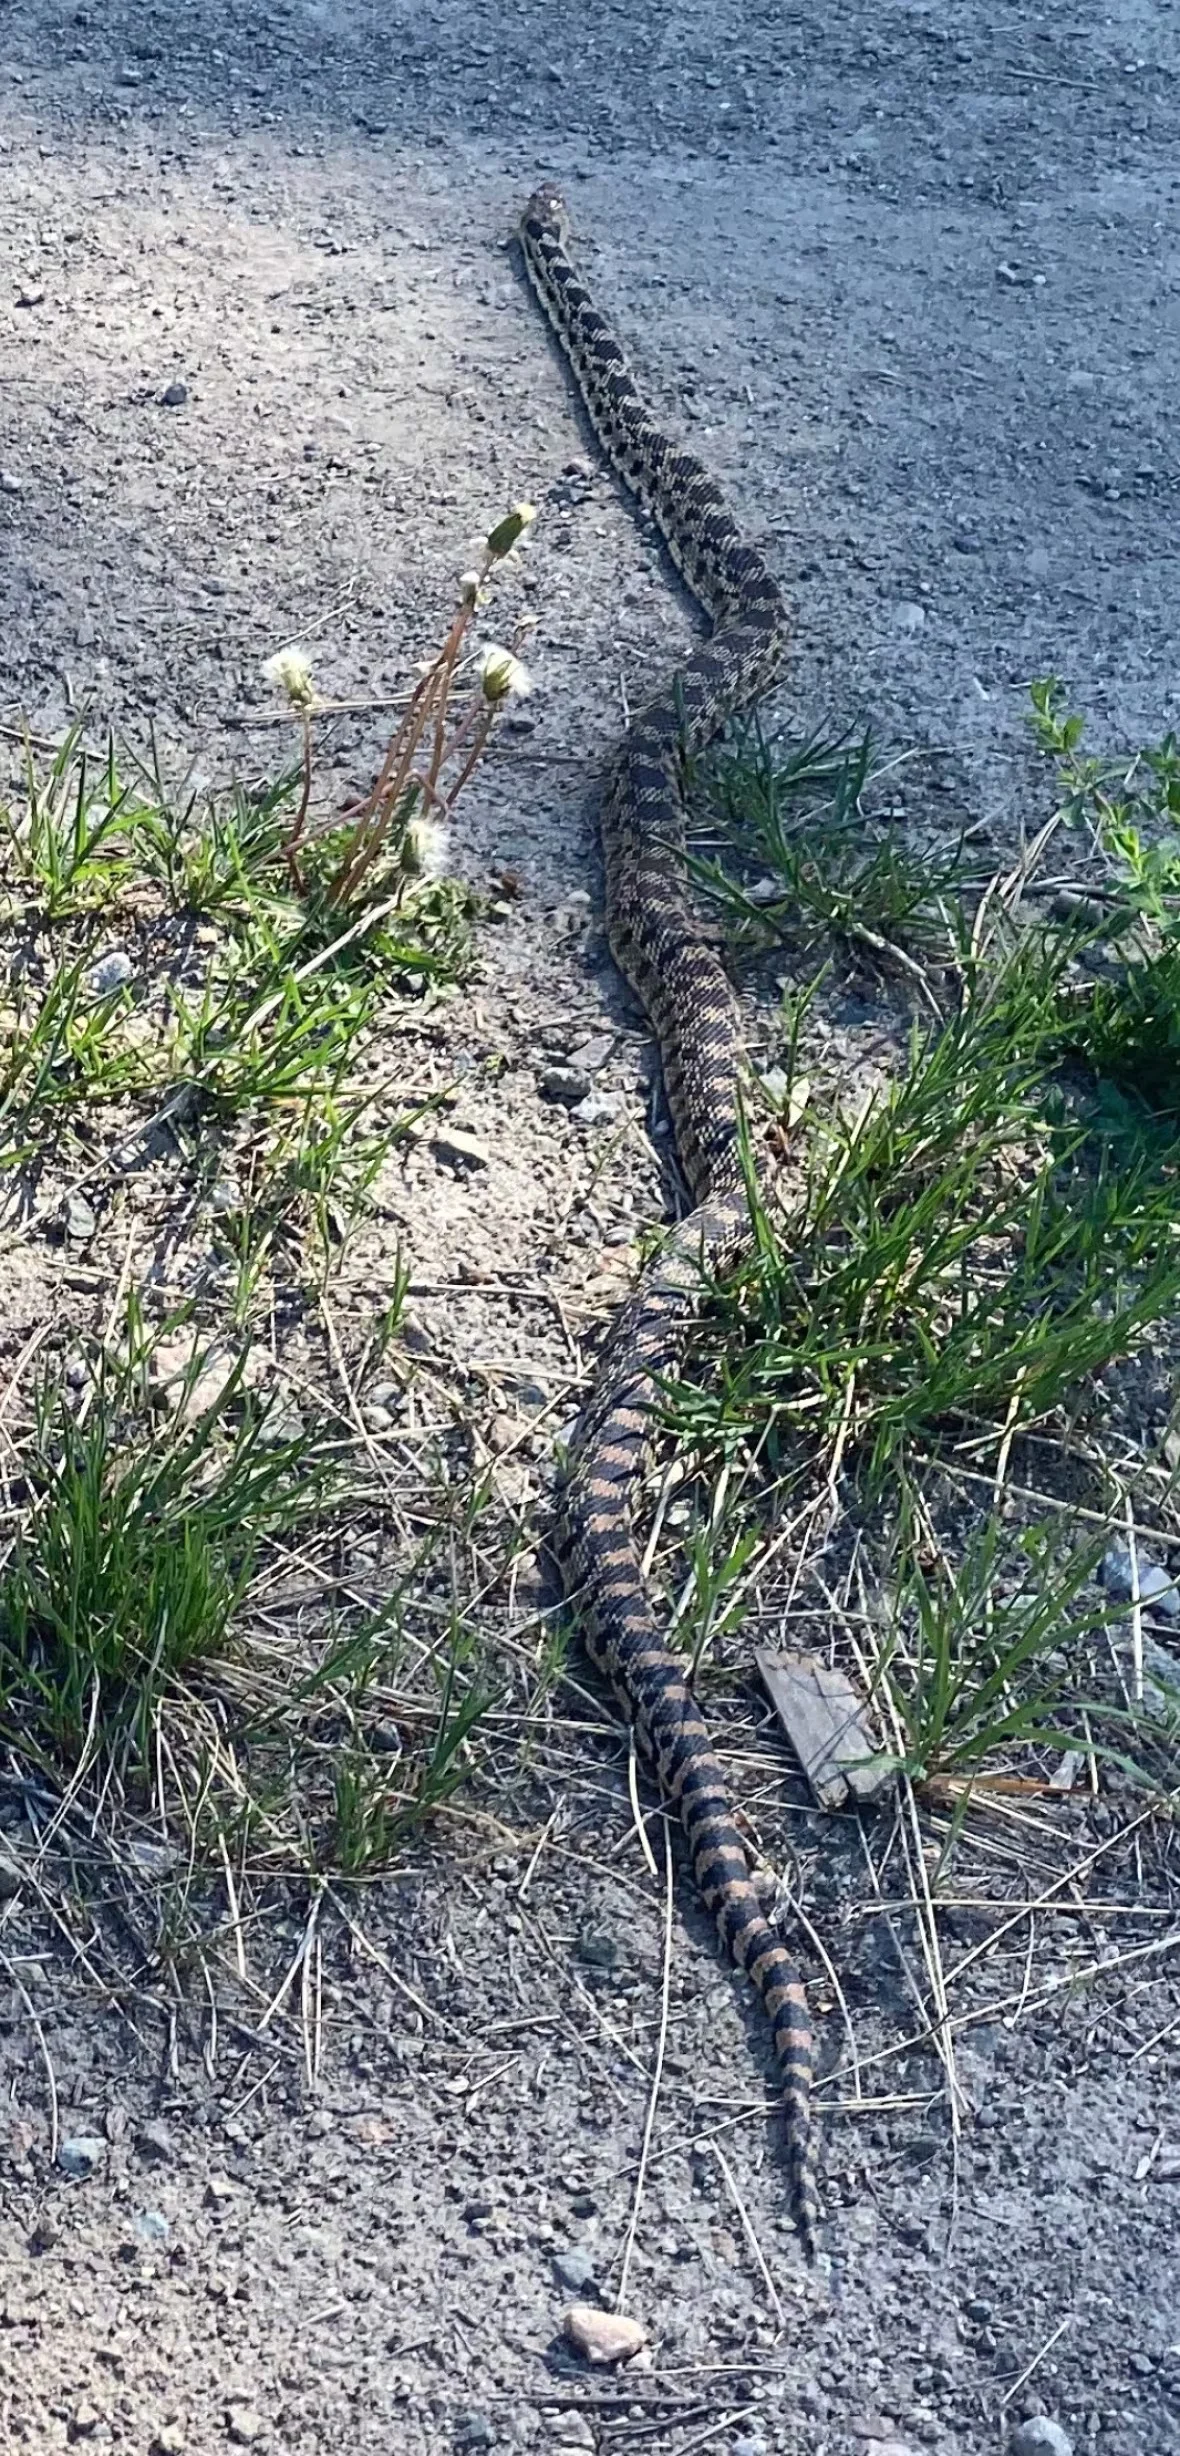 CBC: A Great Basin gopher snake spotted in the Glenmore neighbourhood of Kelowna on May 14. (Karen Olsson/Facebook)